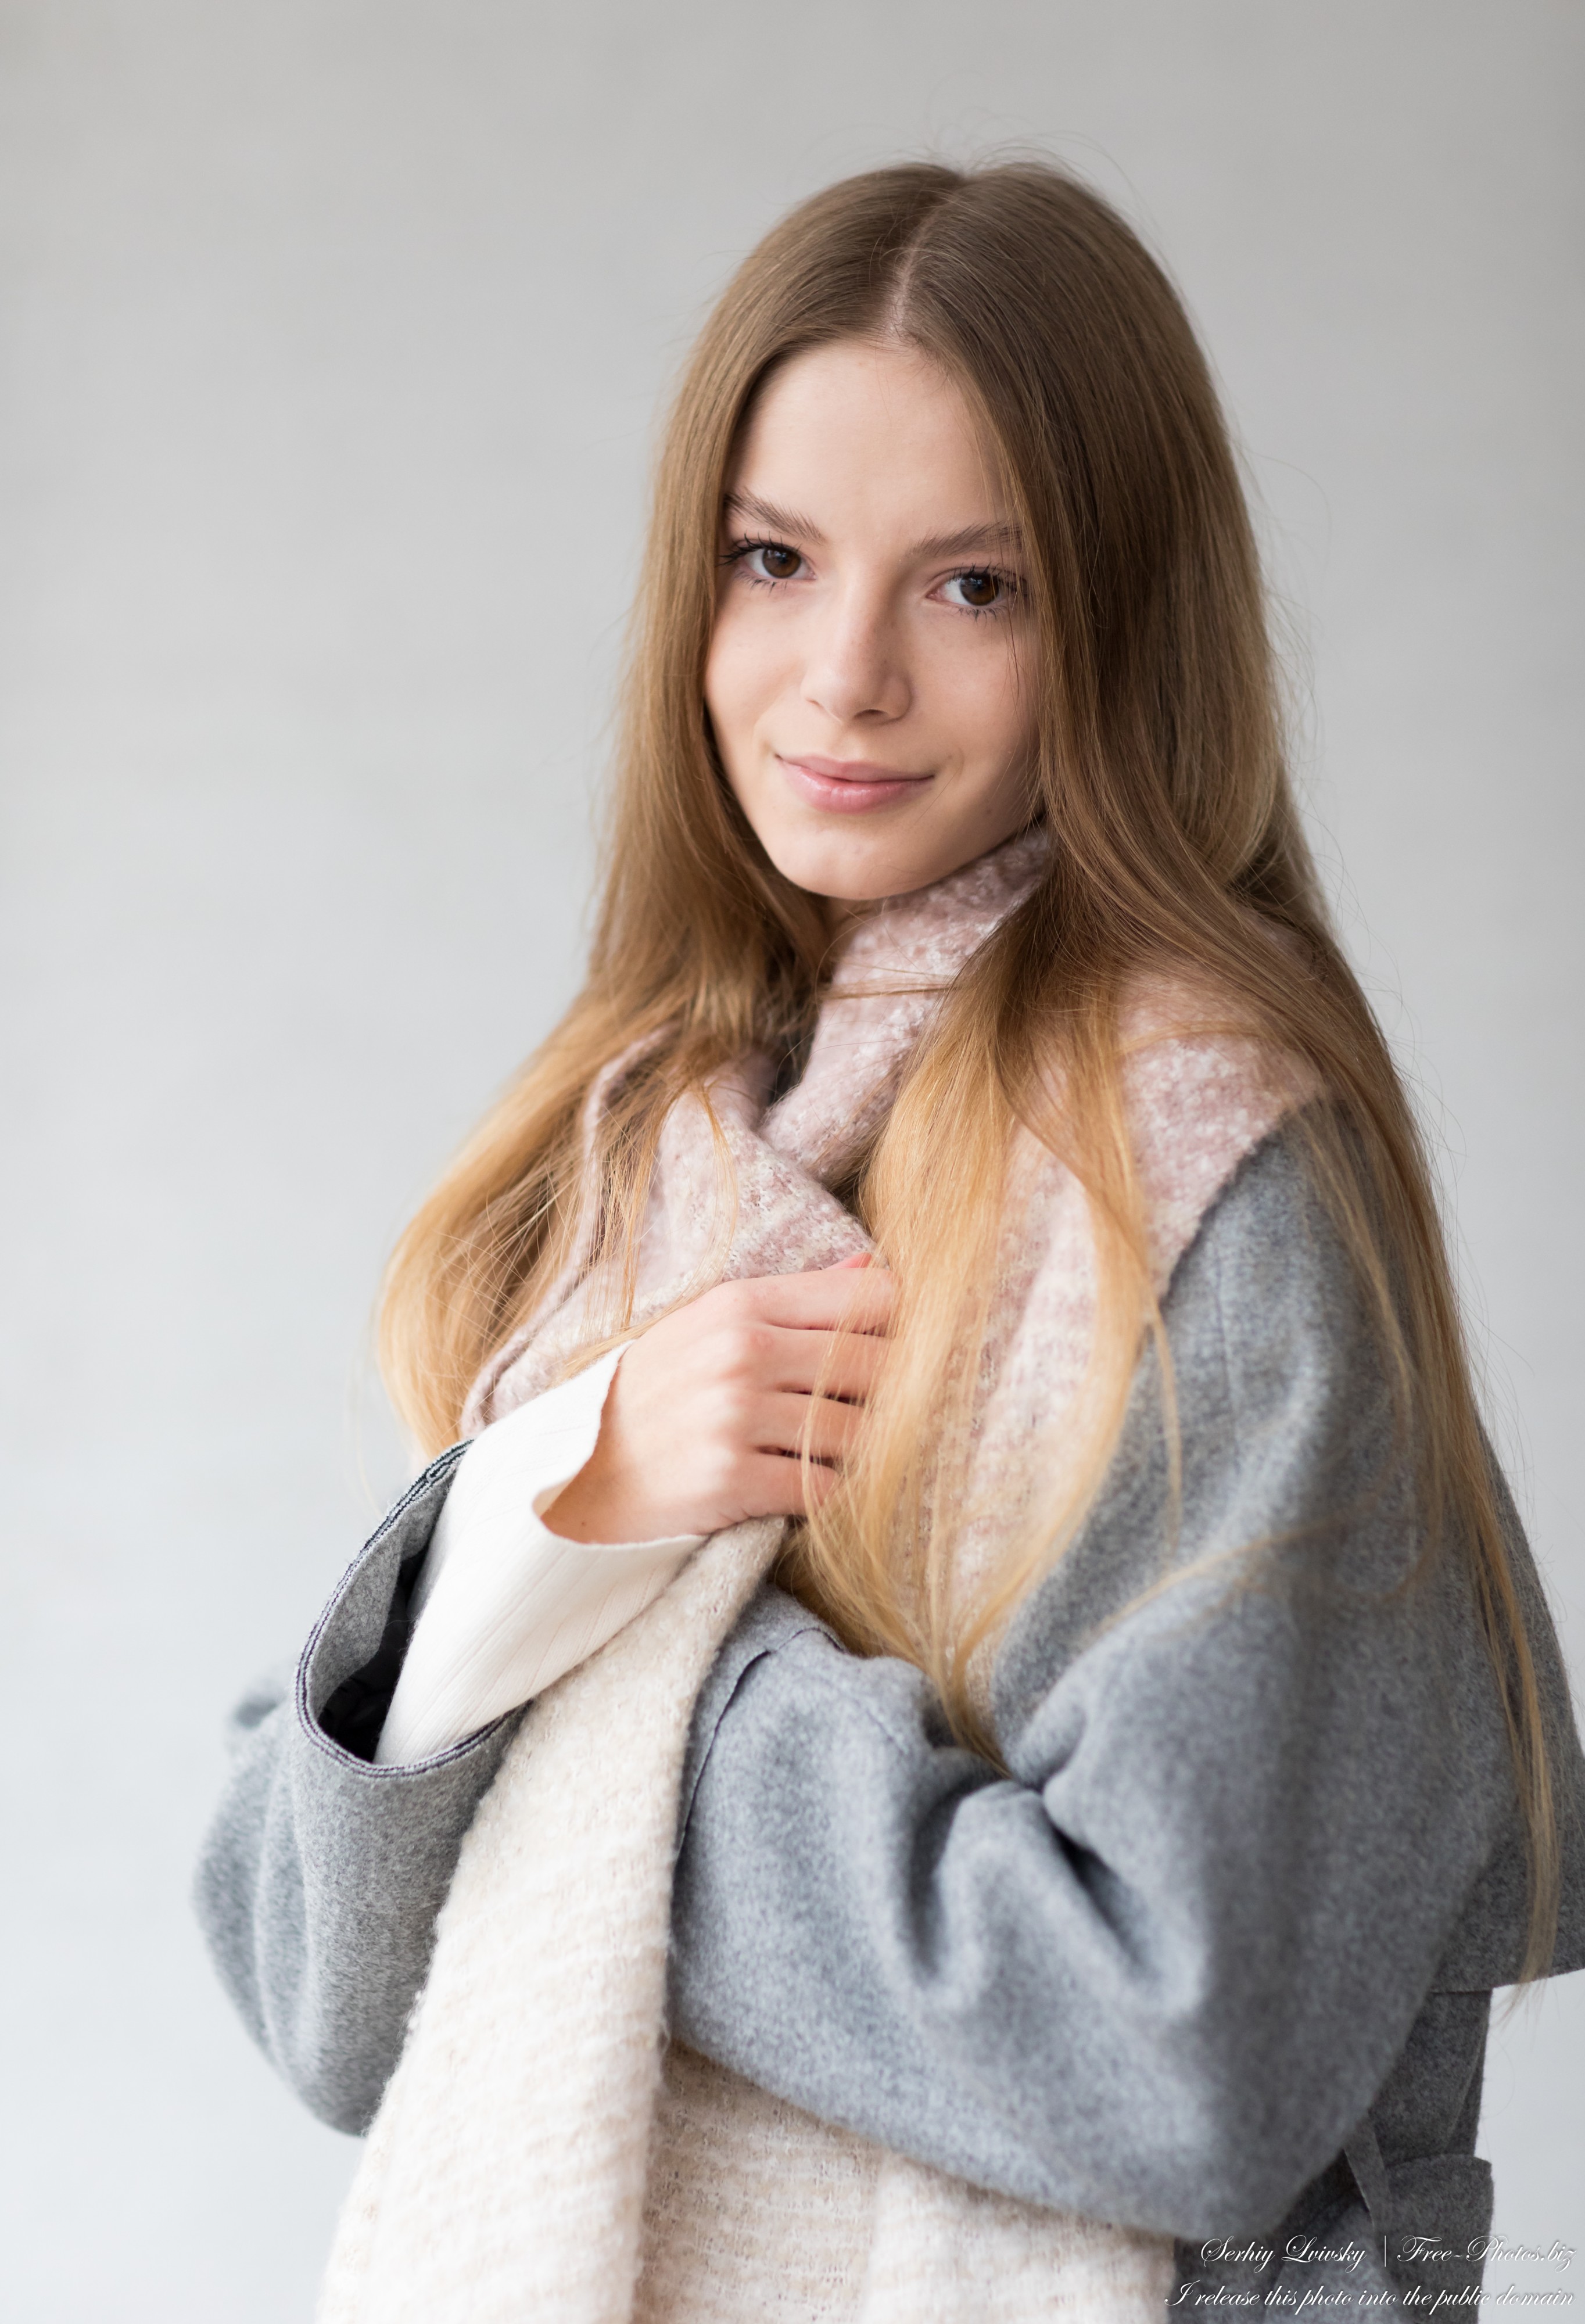 Vika - an 18-year-old God's creation with natural fair hair, photographed by Serhiy Lvivsky in November 2022, picture 2